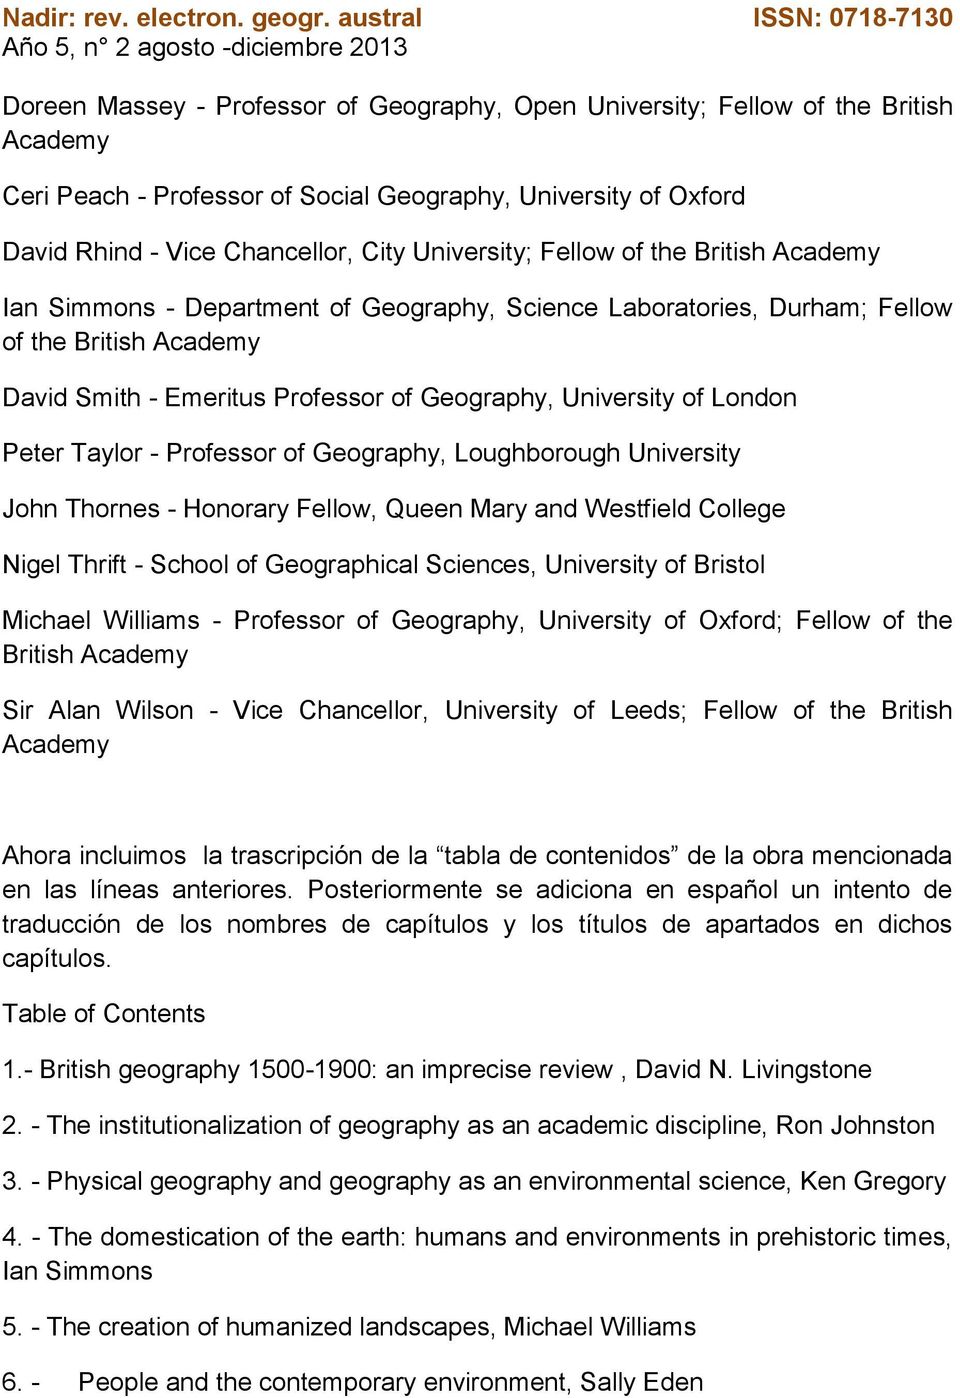 Peter Taylor - Professor of Geography, Loughborough University John Thornes - Honorary Fellow, Queen Mary and Westfield College Nigel Thrift - School of Geographical Sciences, University of Bristol